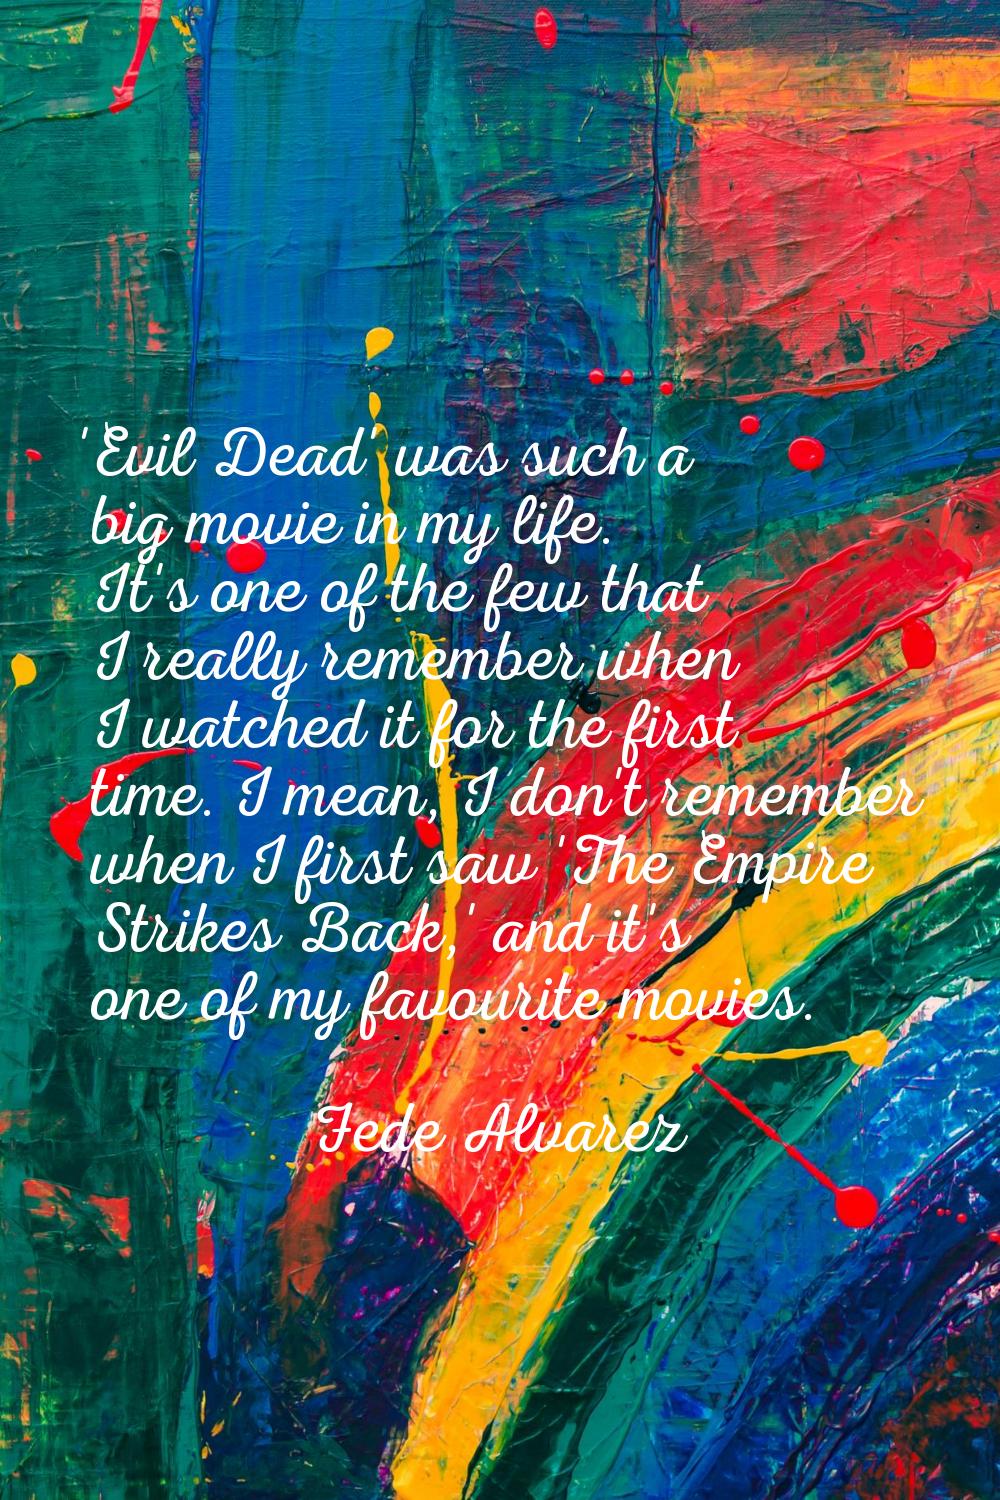 'Evil Dead' was such a big movie in my life. It's one of the few that I really remember when I watc